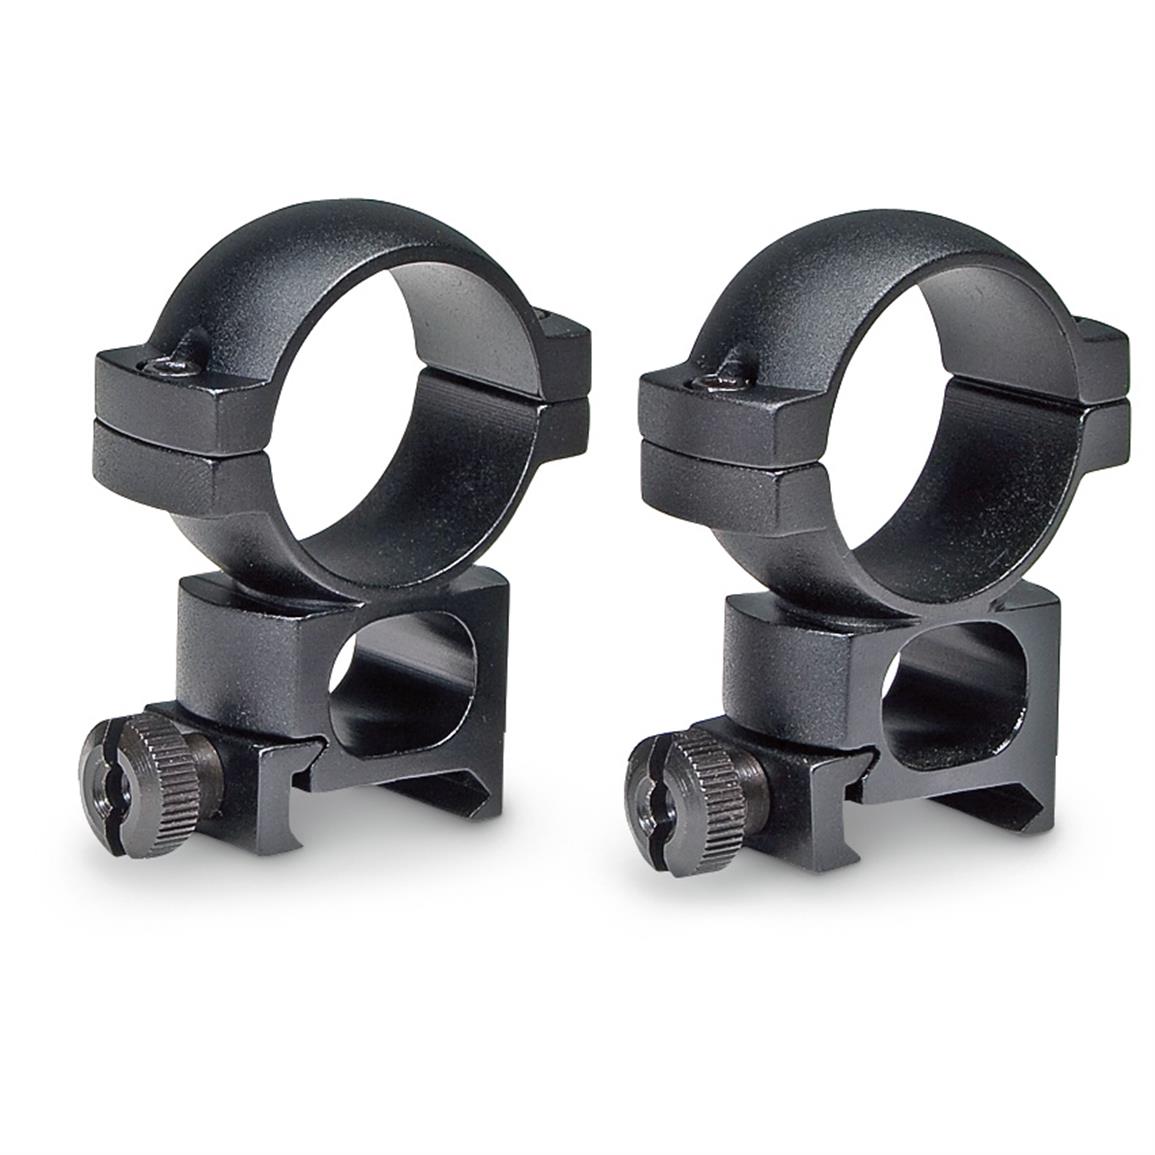 Vortex Hunter 1" Rifle Scope Rings, High 612754, Rings & Mounts at